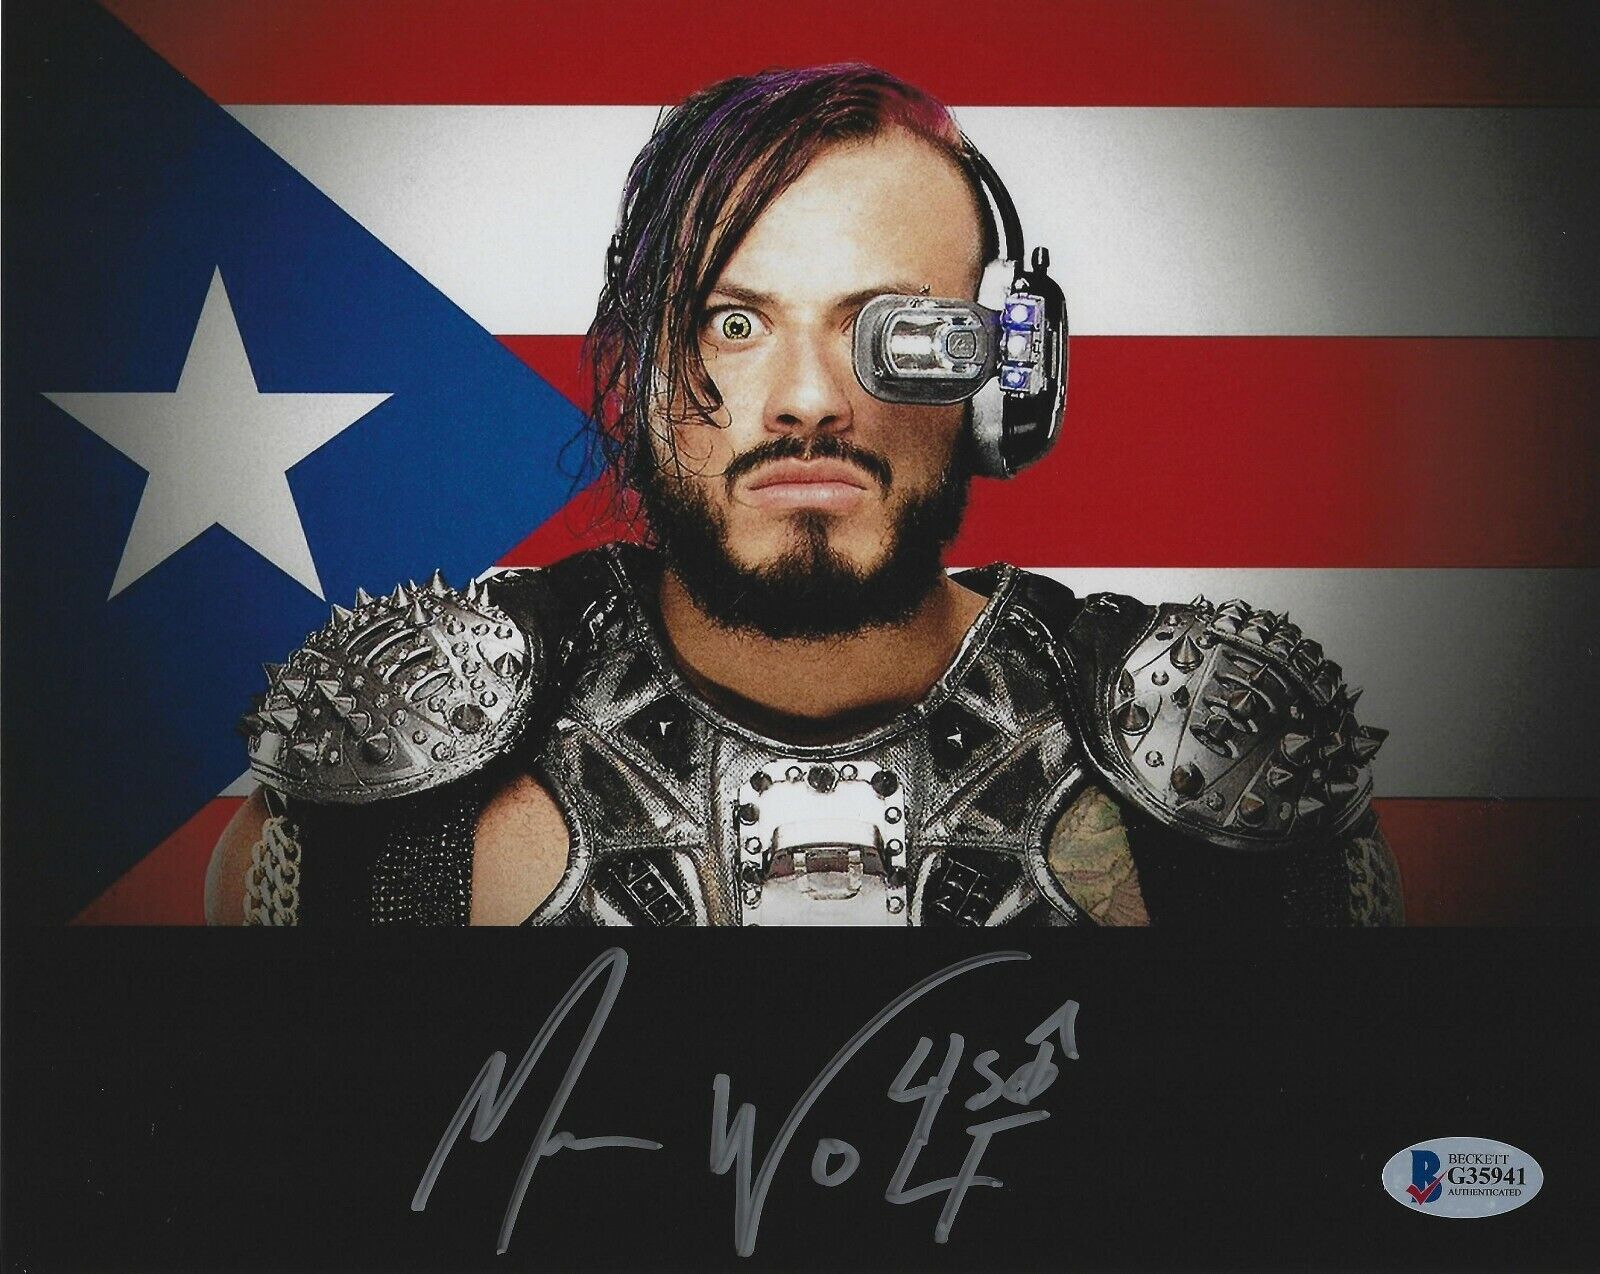 Mr Mecha Wolf 450 Signed 8x10 Photo Poster painting BAS Beckett COA WWC WWE NXT Picture Auto'd 6